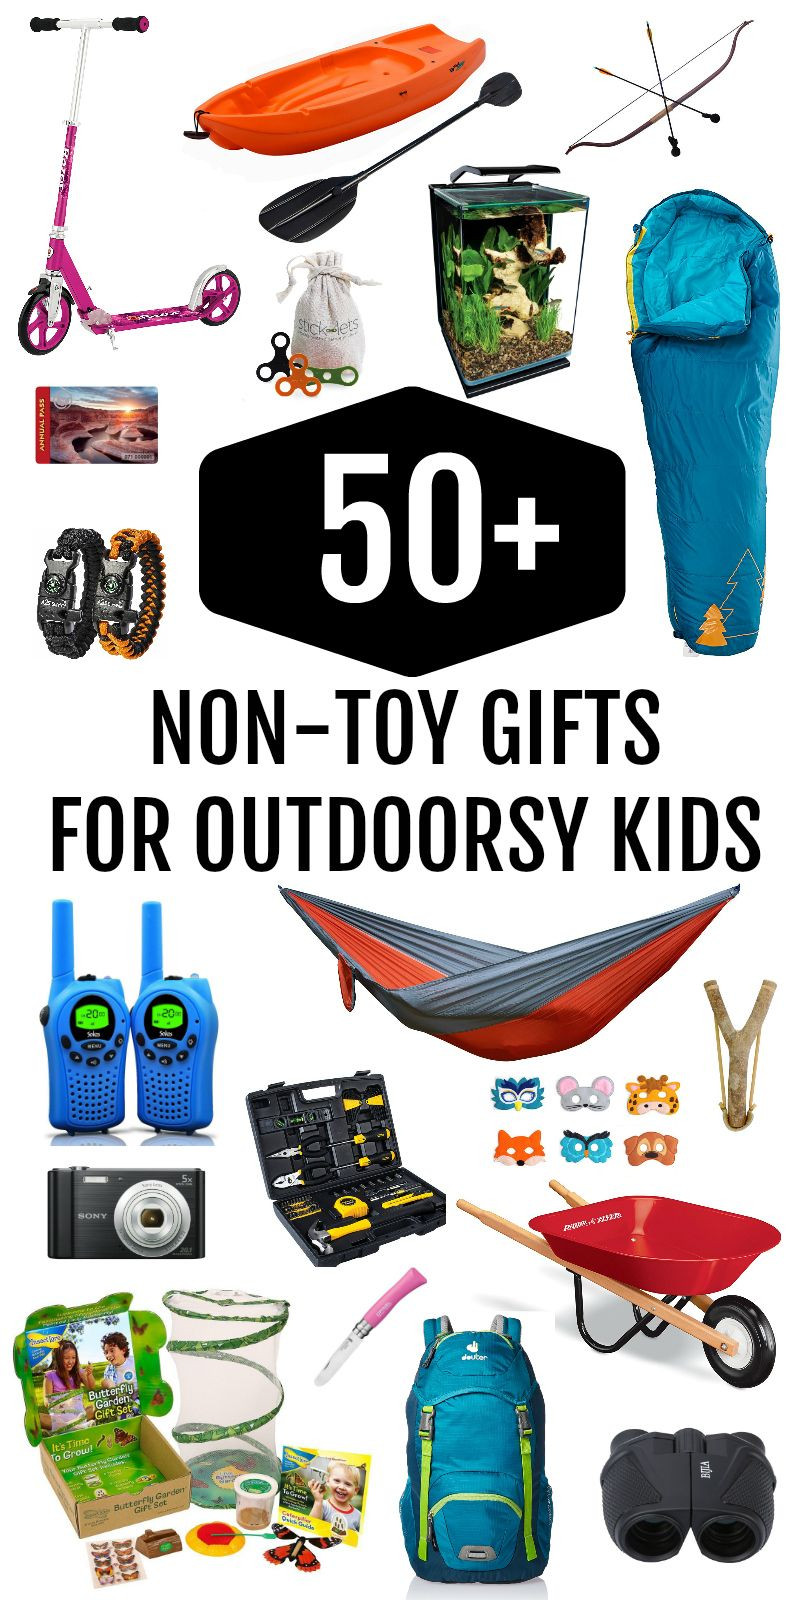 Outdoor Gift Ideas For Boys
 The Ultimate Non Toy Gift Guide for Outdoorsy Kids